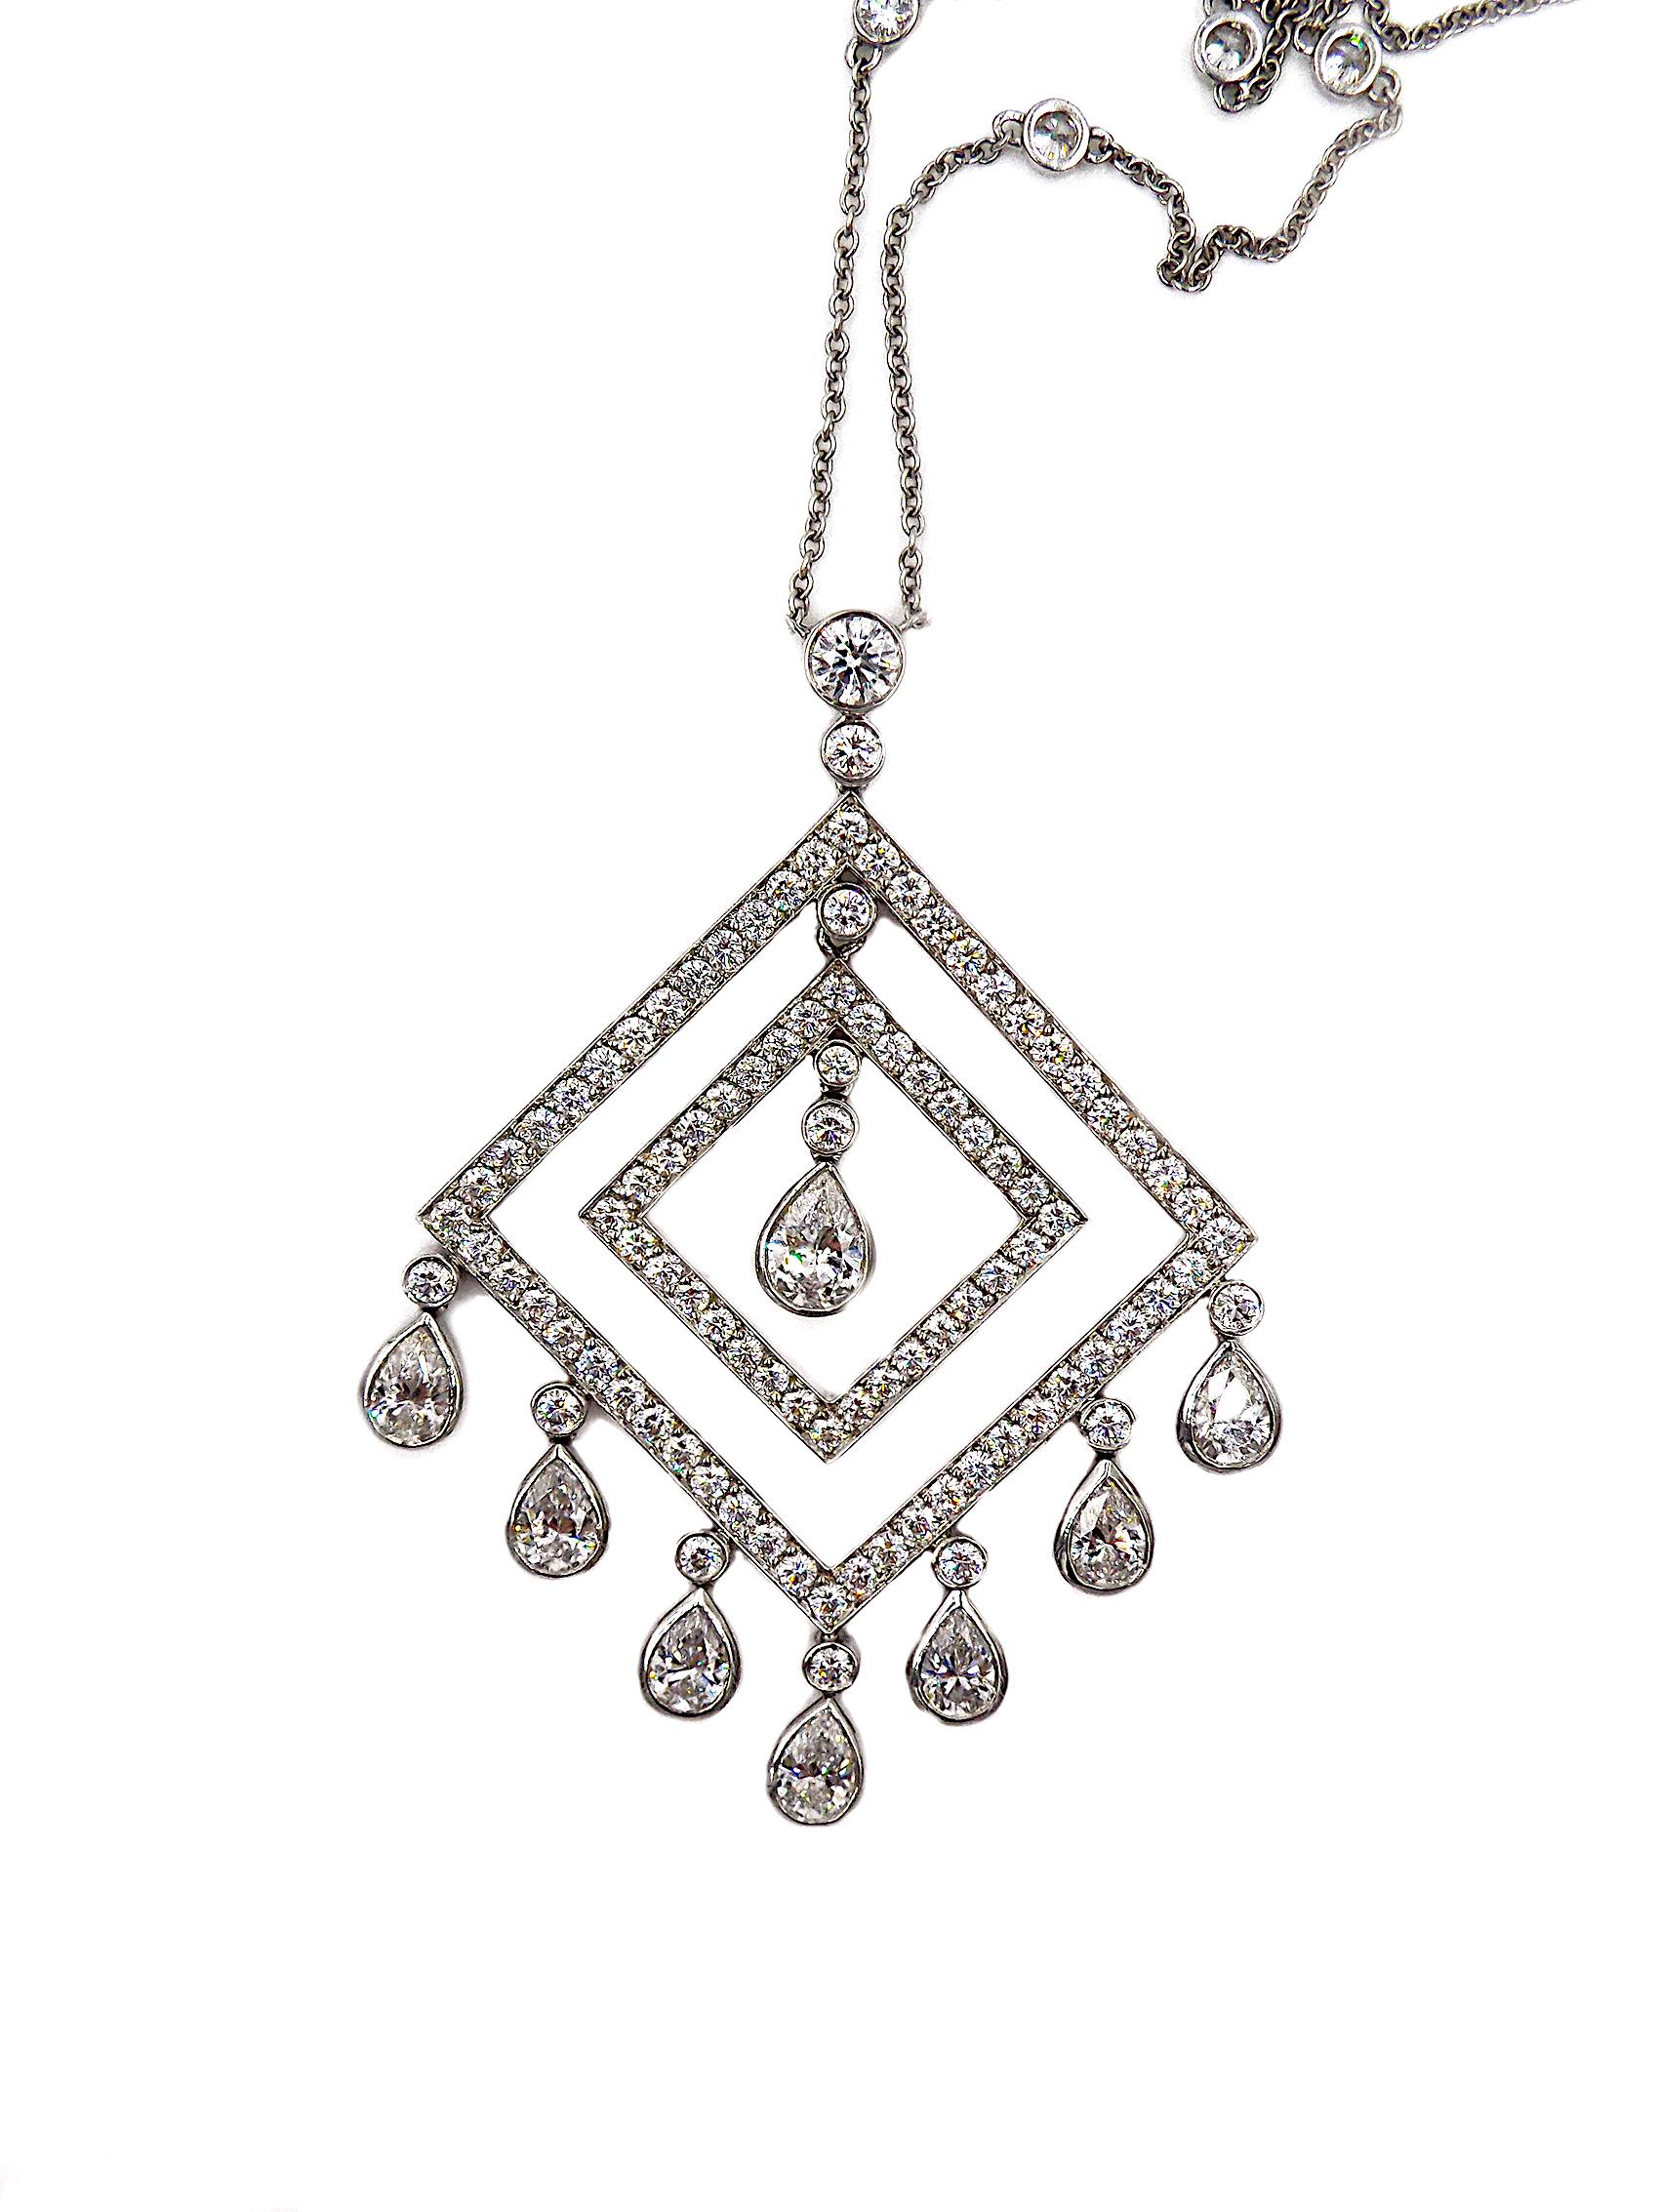 Suspending an articulated openwork circular-cut diamond pendant, with a fringe of pear-shaped diamonds, mounted in platinum, to the fine link neckchain, spaced by collet-set diamonds.
Total diamond weight approx. 8ct
Chain length: 16''
Signed